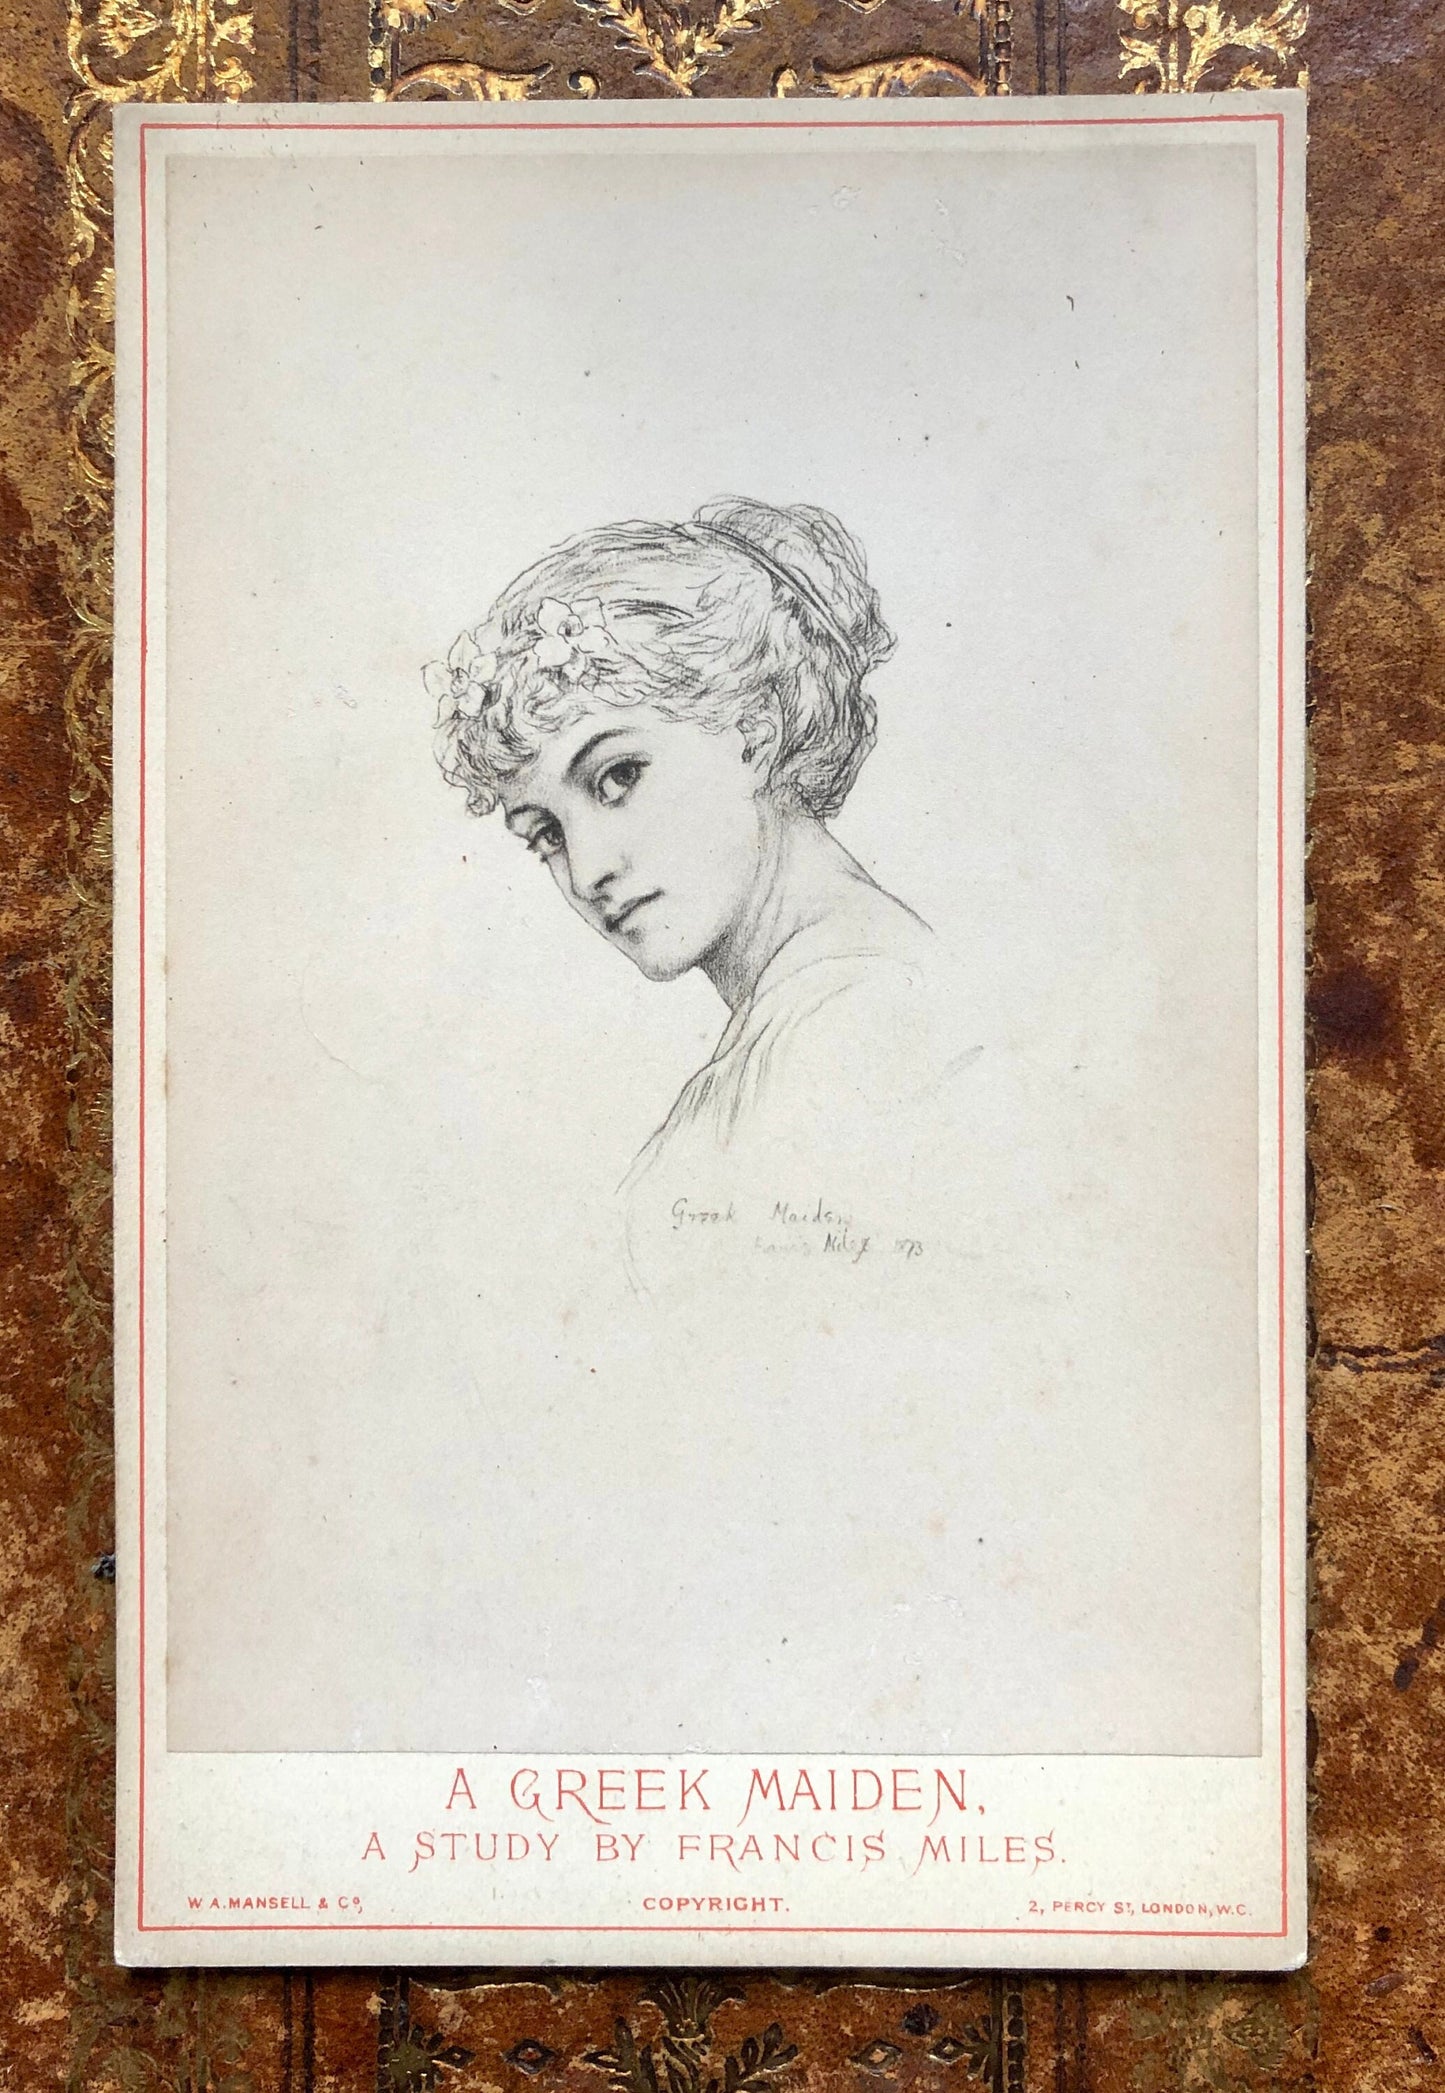 5 Cabinet Cards. Copies of Pencil Drawings of Women by Francis Miles. In Red Cloth Portfolio. Dated 1872. Size: 16.5 x 10.5 cms.